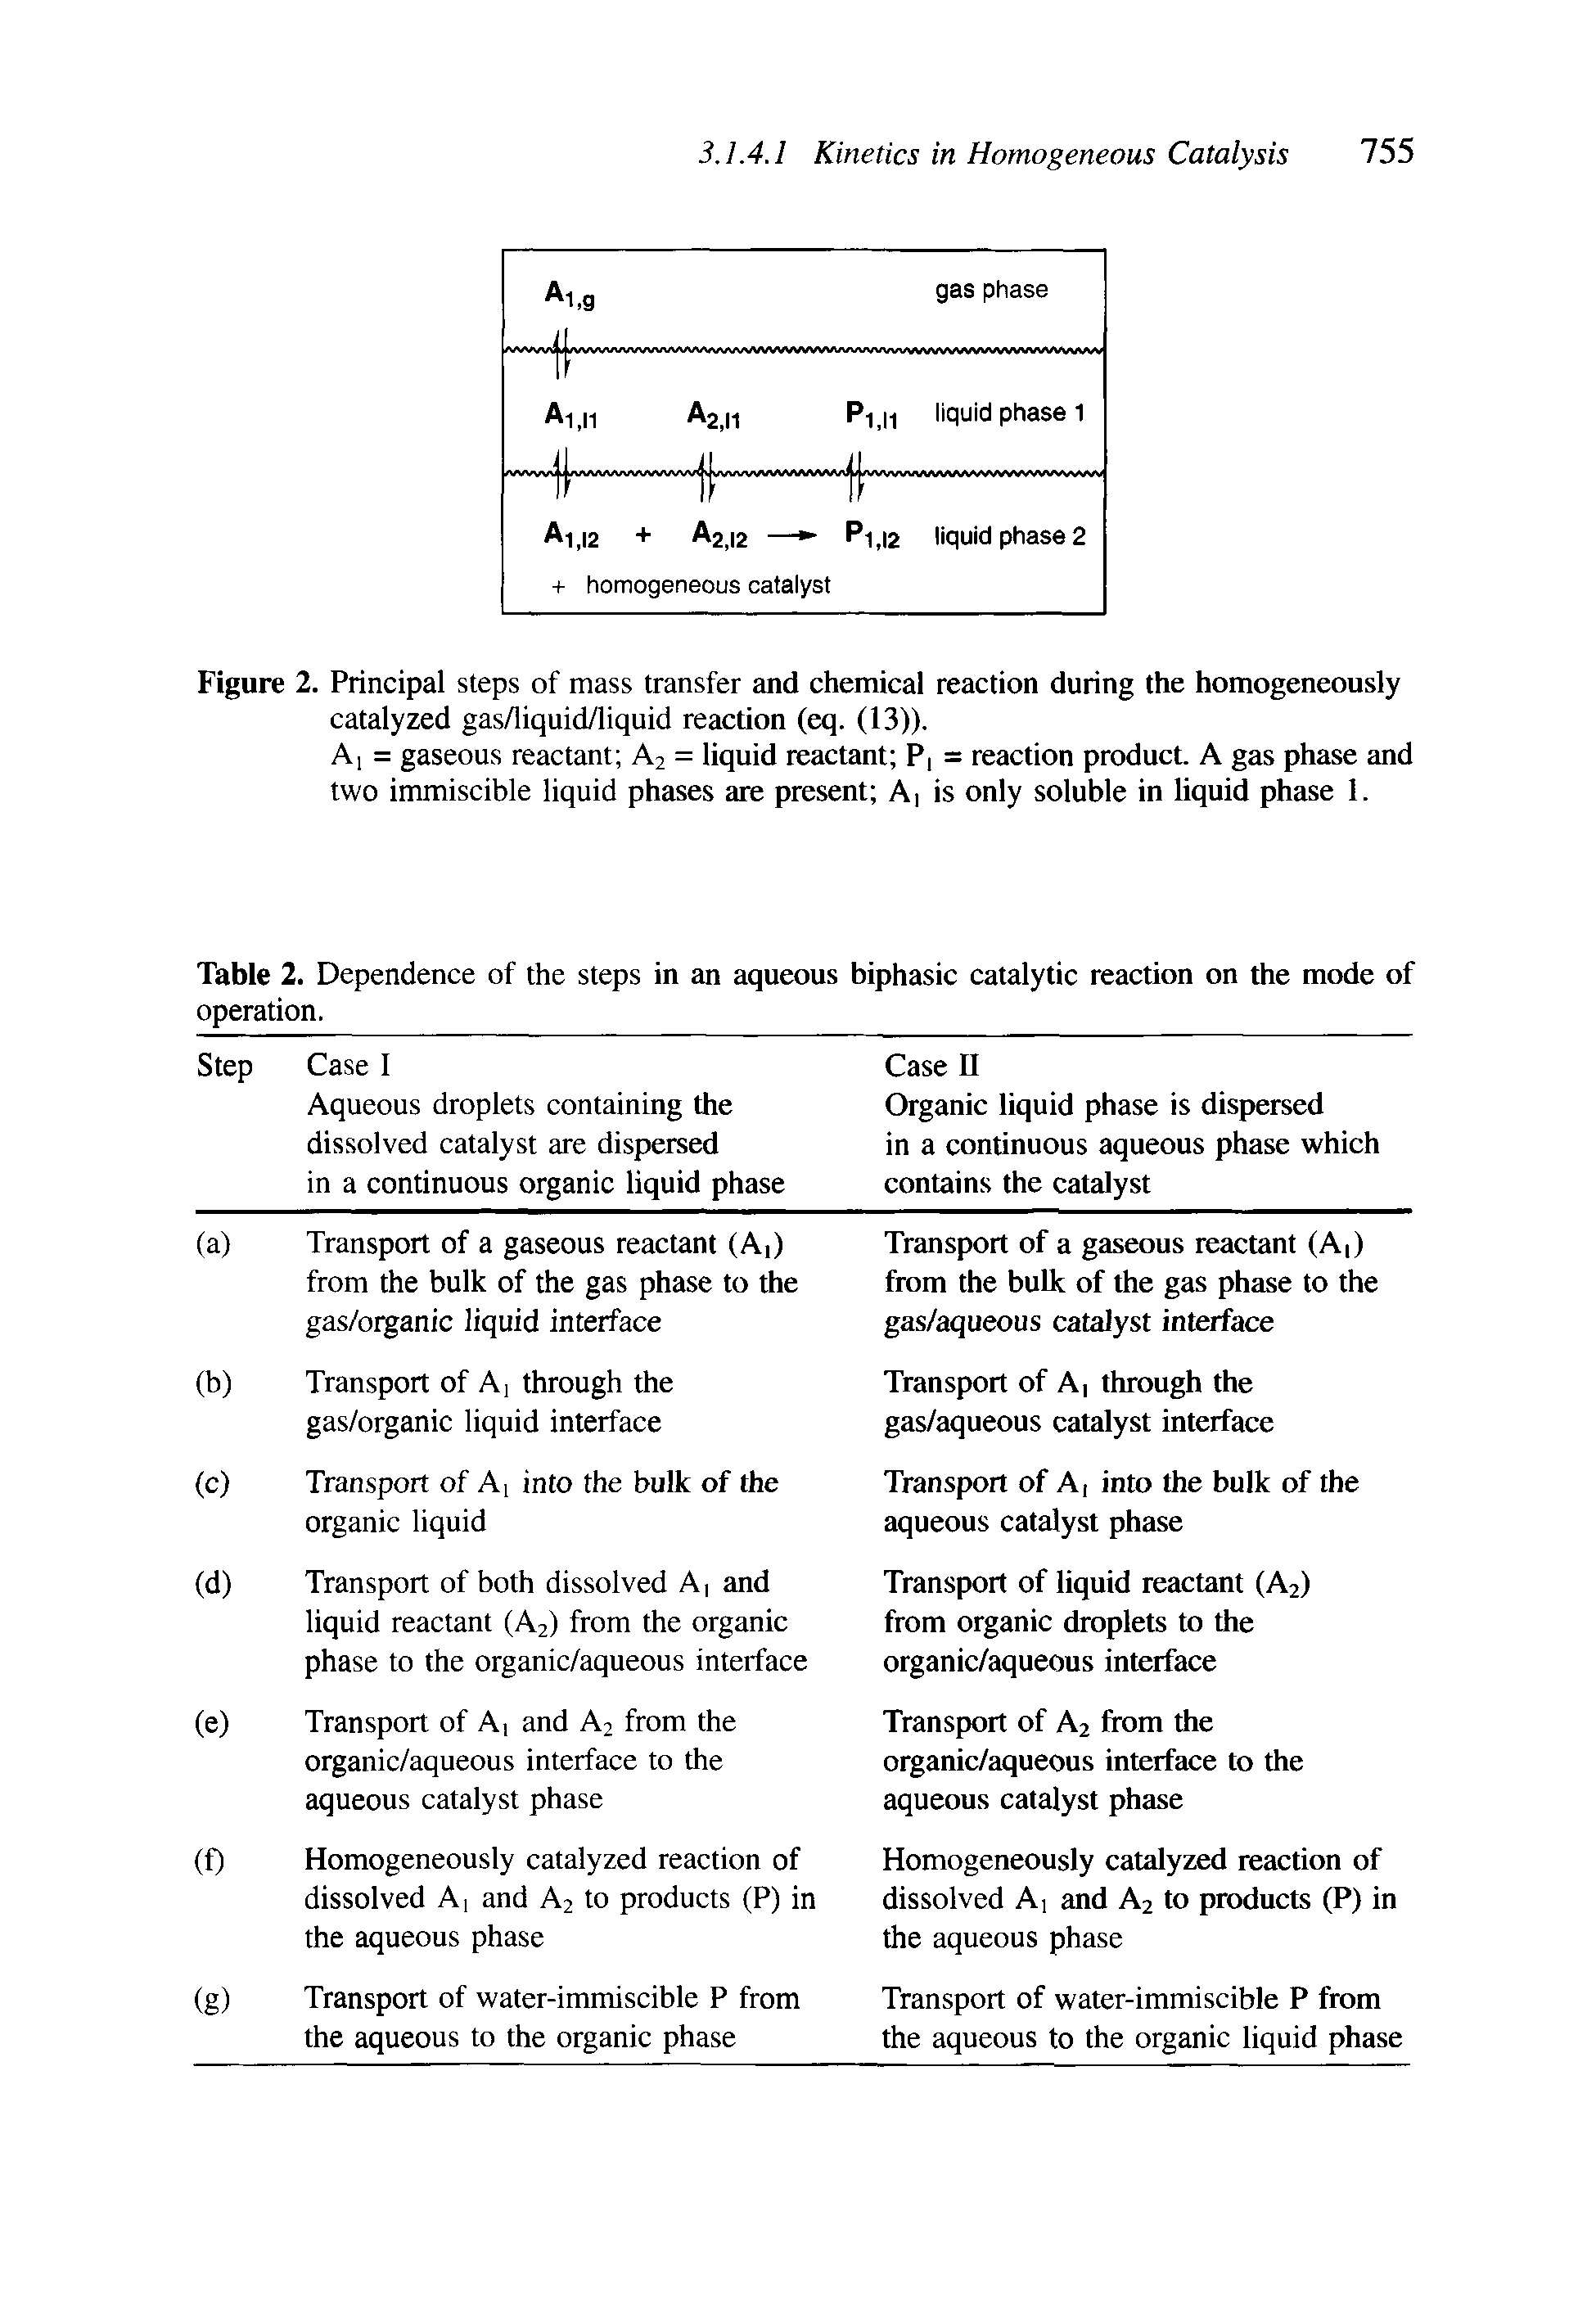 Table 2. Dependence of the steps in an aqueous biphasic catalytic reaction on the mode of operation.